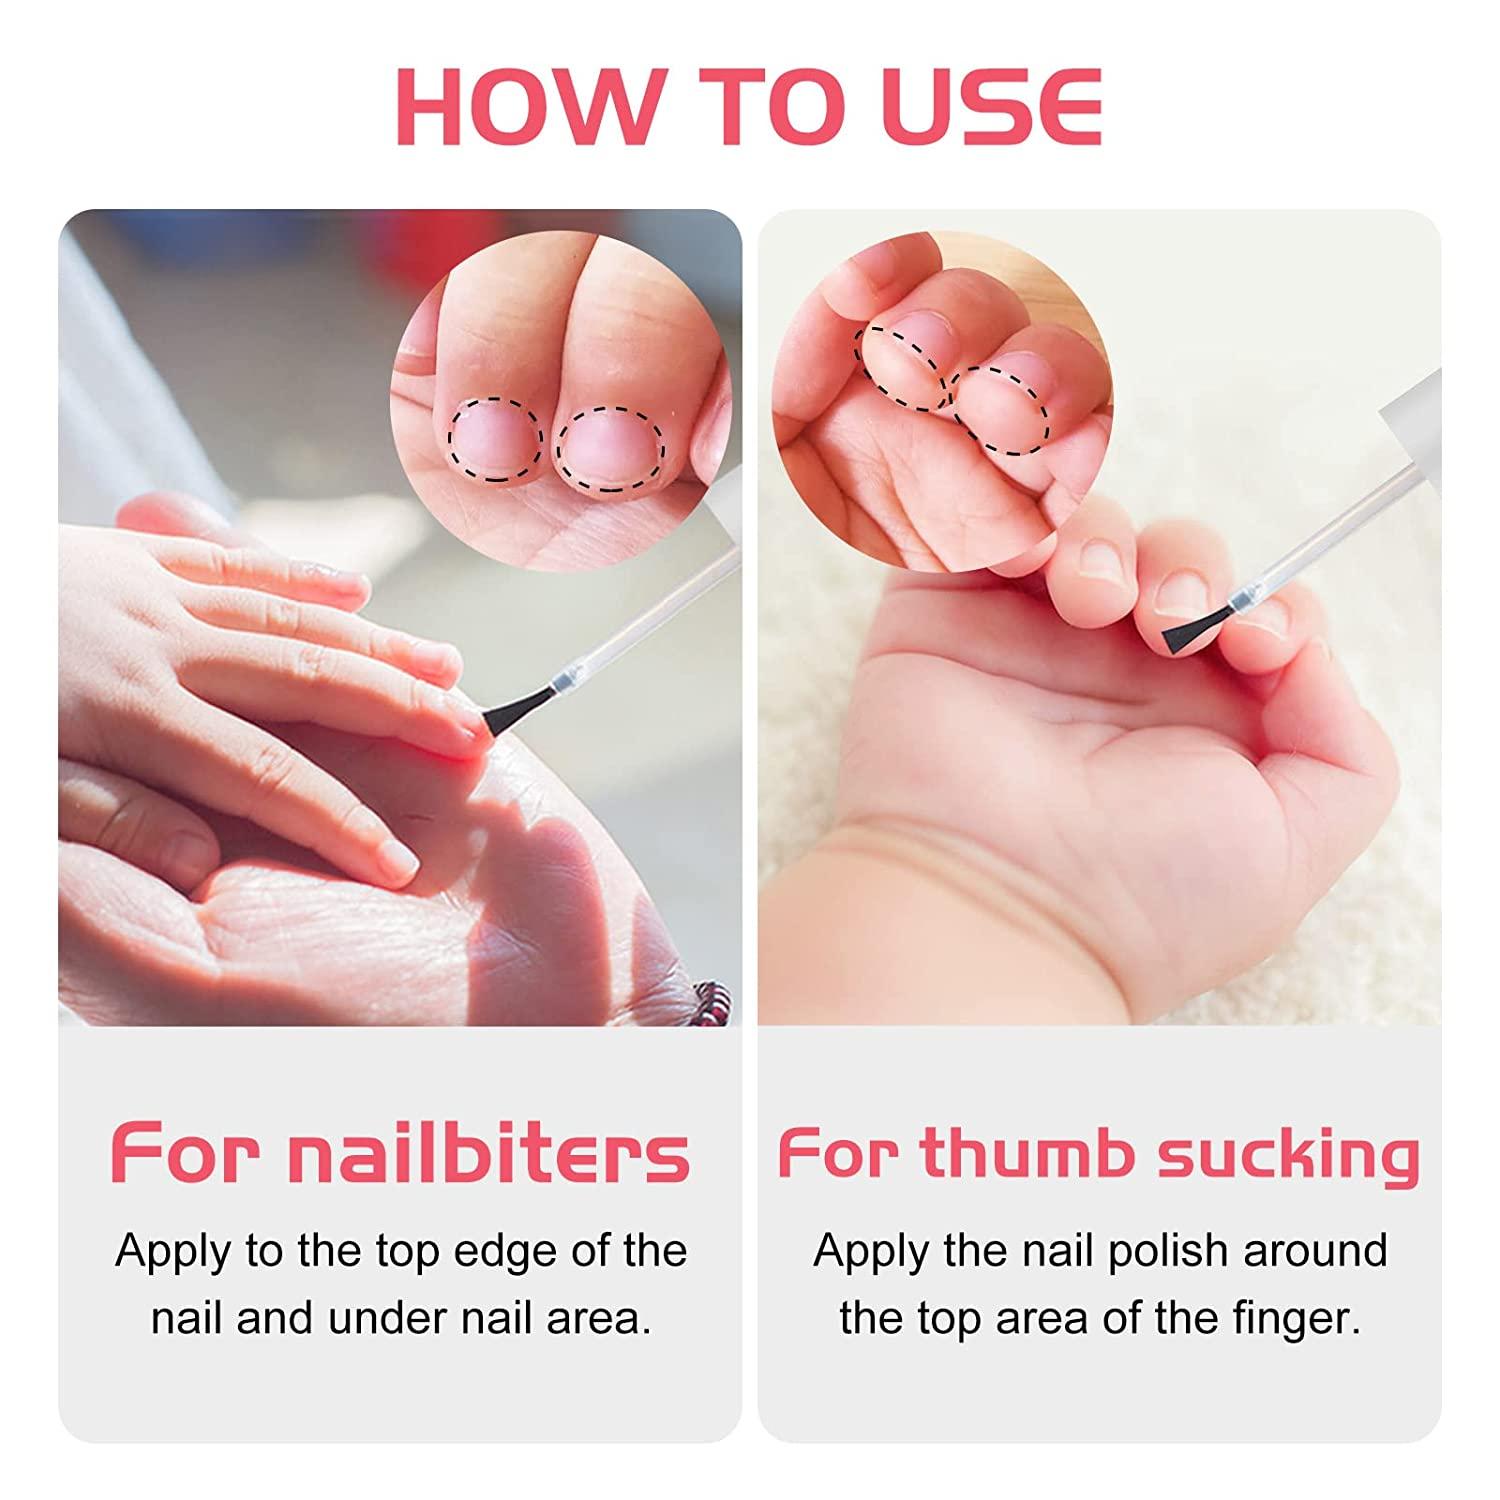 Nail Biting Treatment For Kids - Nail Polish To Help Thumb Sucking Stop For  Kids and Biting Nails, Bitter Taste, Safe & Effective, Easy To Apply,15ML  original